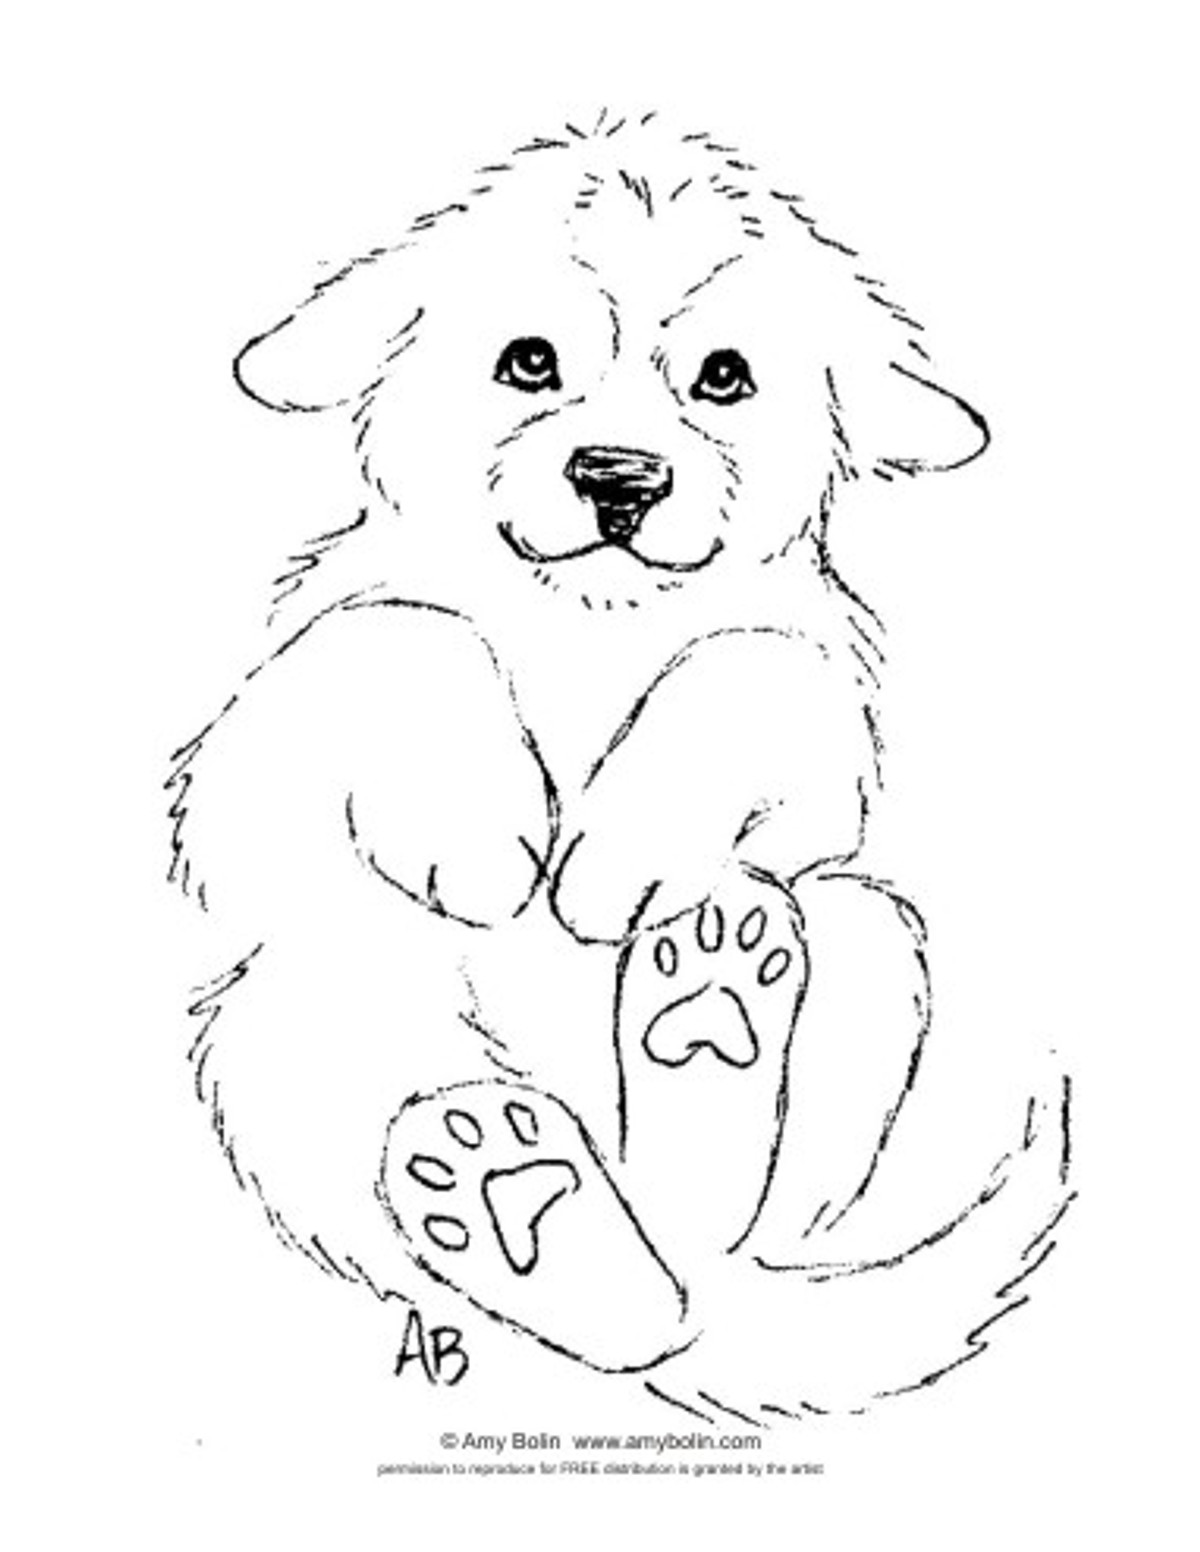 Download FREE COLORING SHEET DOWNLOAD · "Puppy Love" · GREAT ...